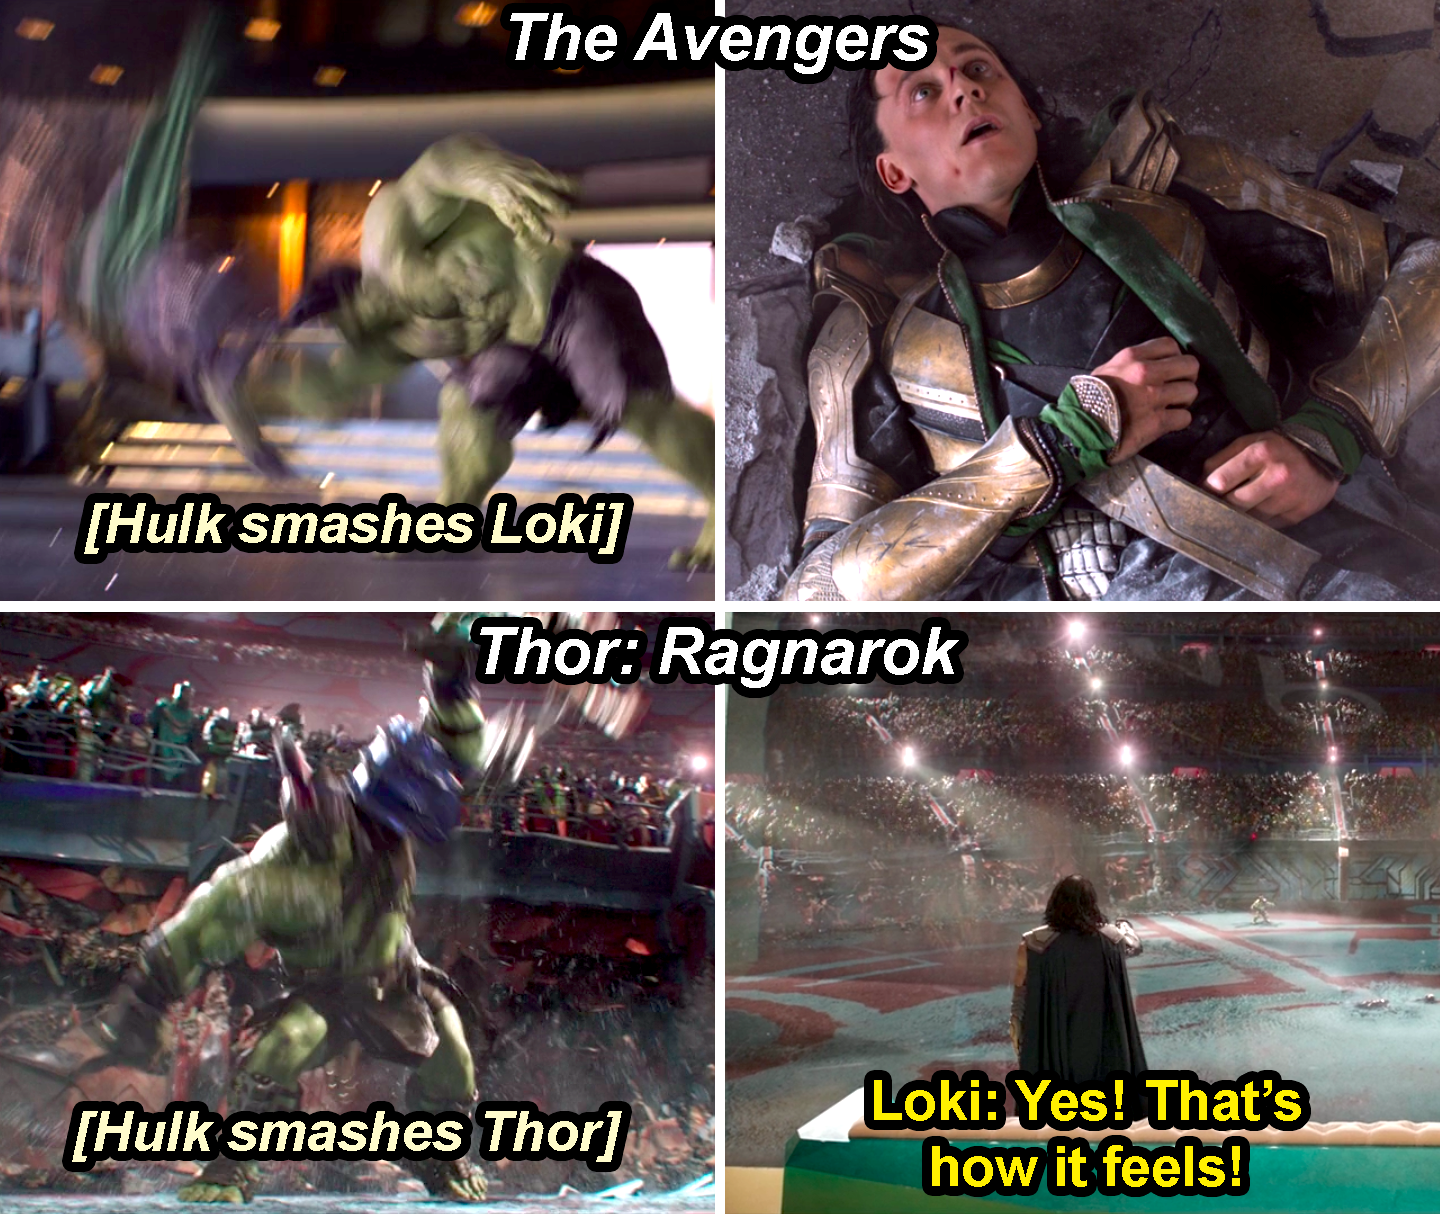 Hulk smashing Loki in The Avengers and Hulk smashing Thor in Ragnarok with Loki yelling, &quot;Yes, that&#x27;s how it feels&quot;